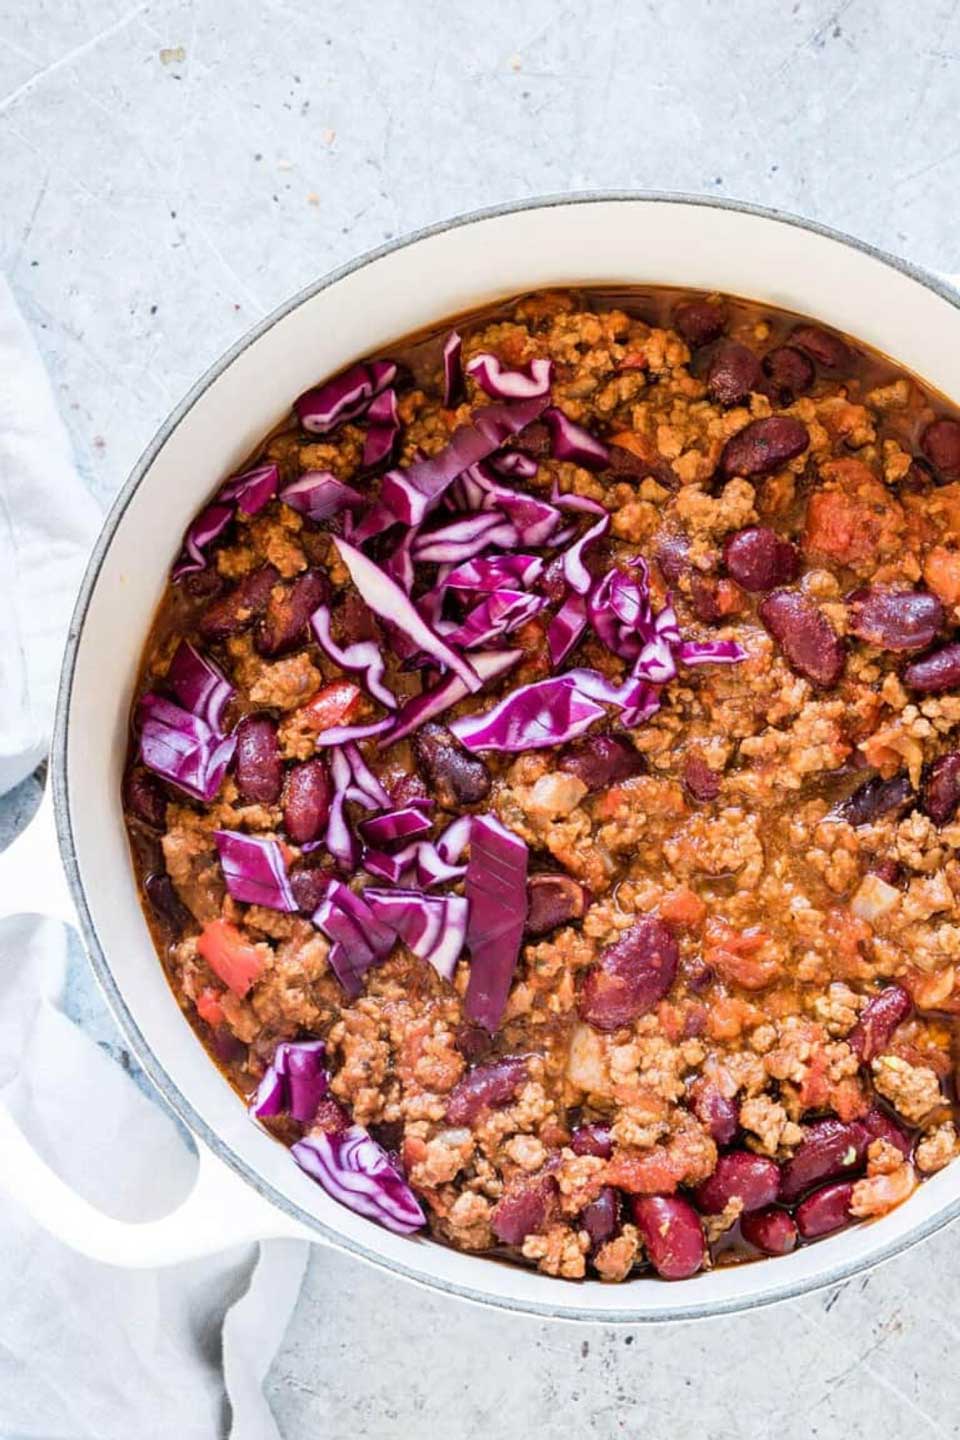 This Instant Pot Chilli in 25 Minutes from Bintu at Recipes from a Pantry is specifically a beef chili recipes, but Bintu says you can easily substitute leaner turkey, too. And hey – if you love this idea, be sure to check out our other 16 chili recipes, all created for the pressure cooker!